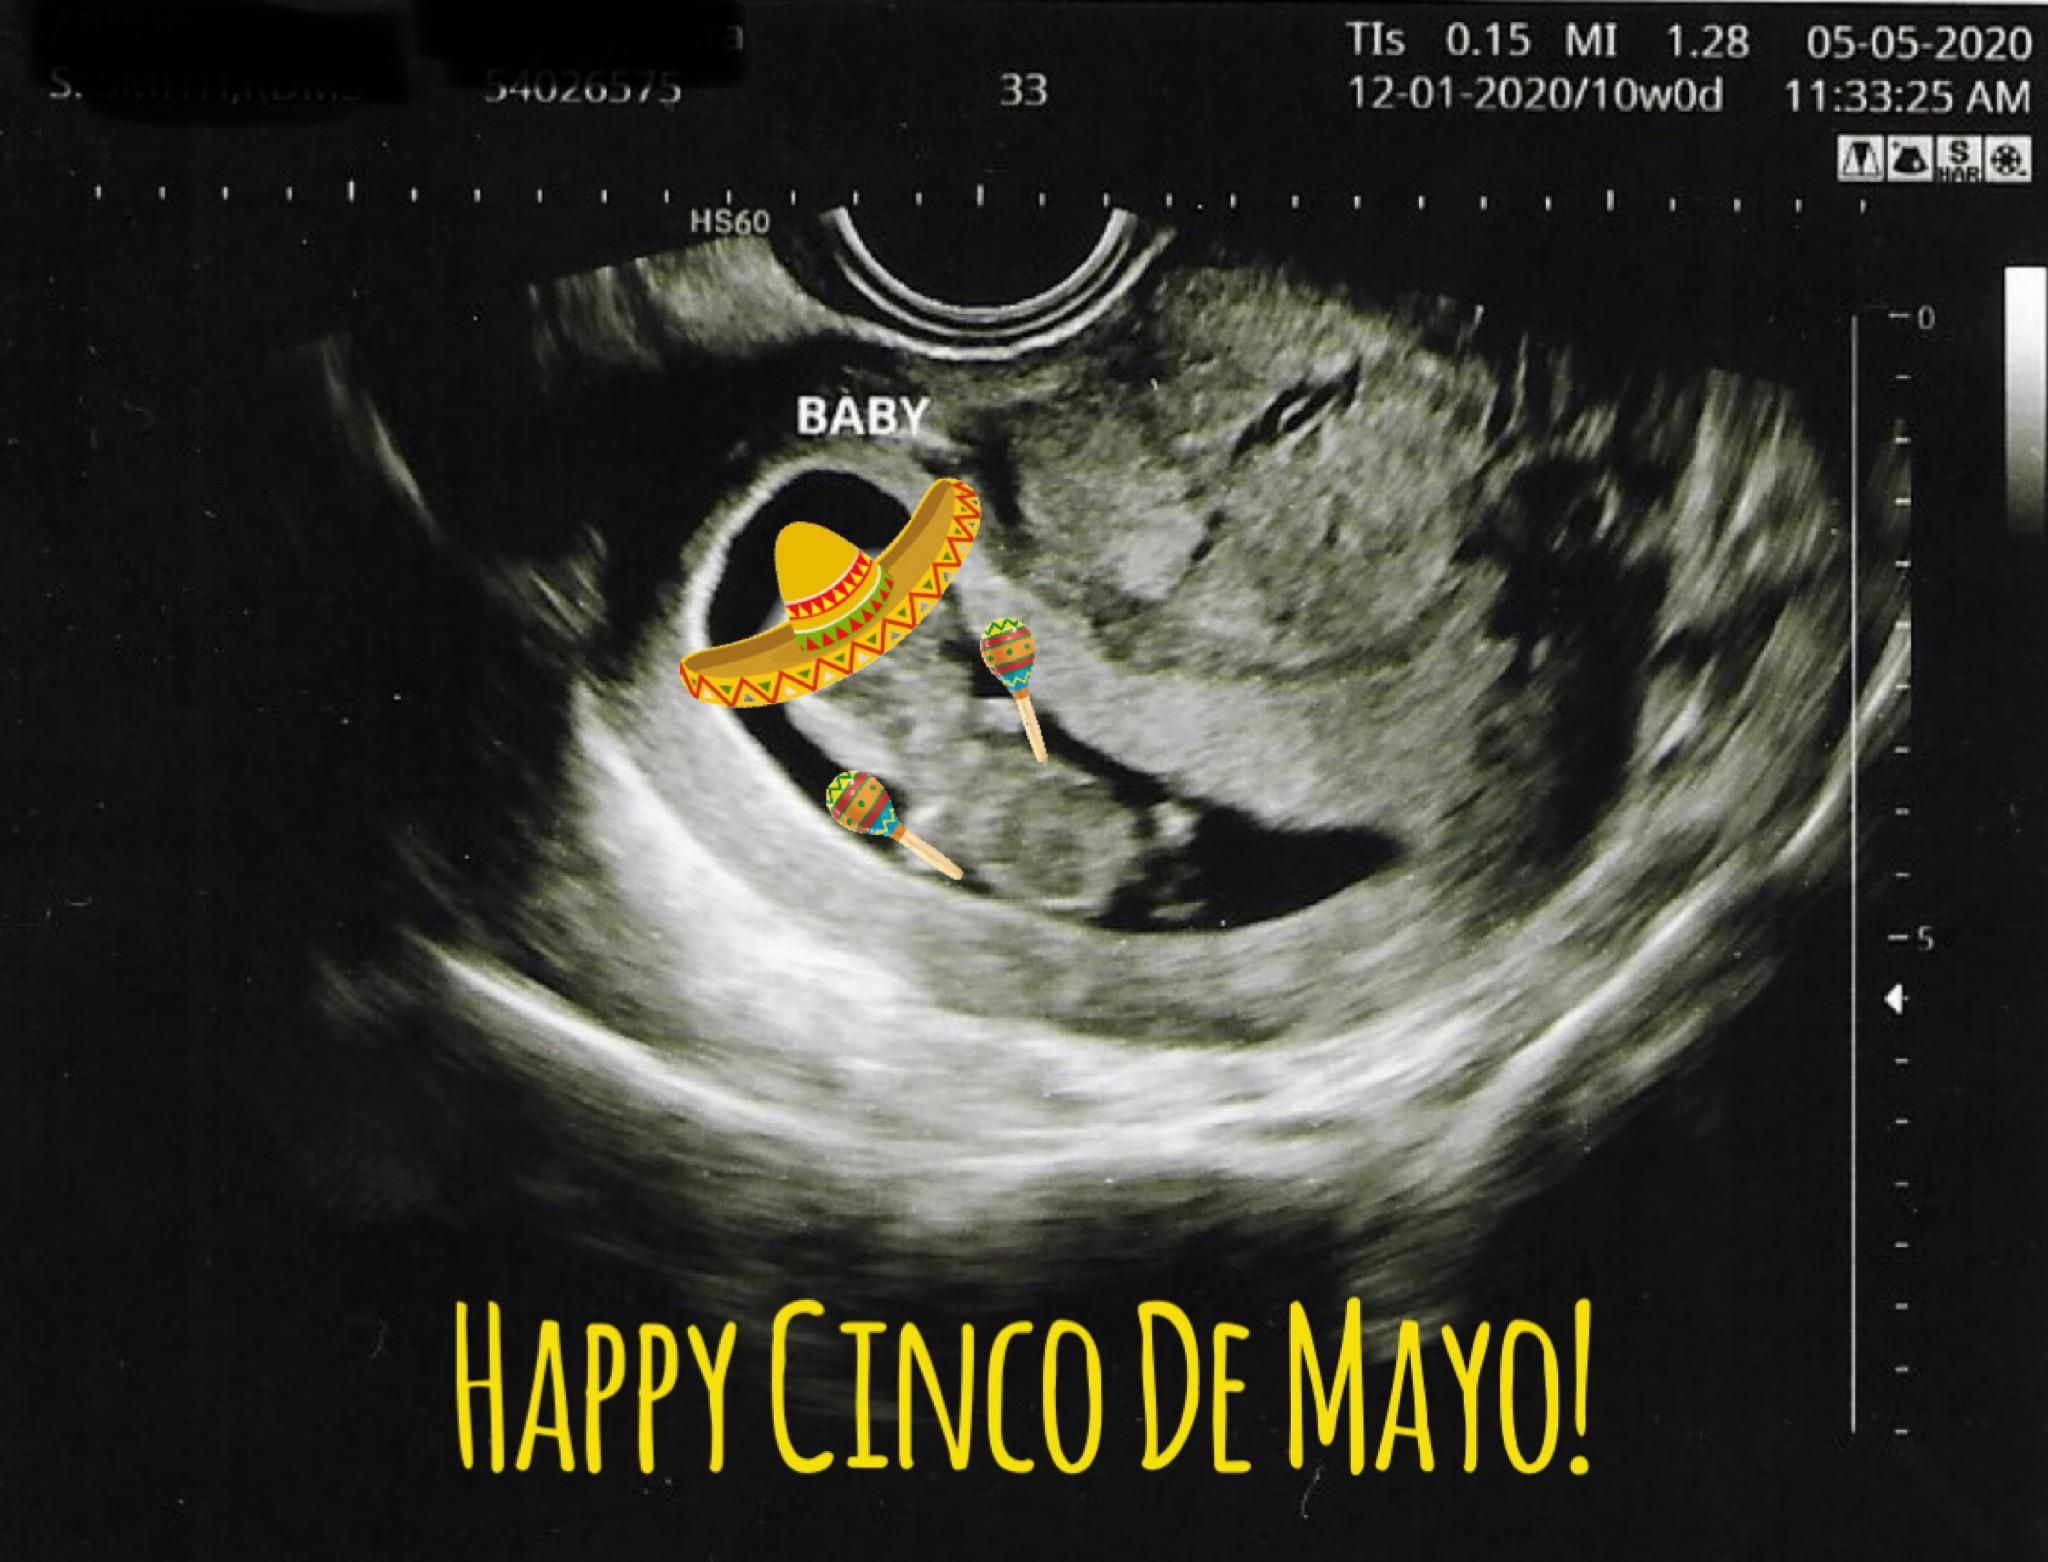 My fiancé and I had our ultrasound on 5/5 but because of the quarantine we couldn’t celebrate. So I made this. She did not find it as humorous as I did.